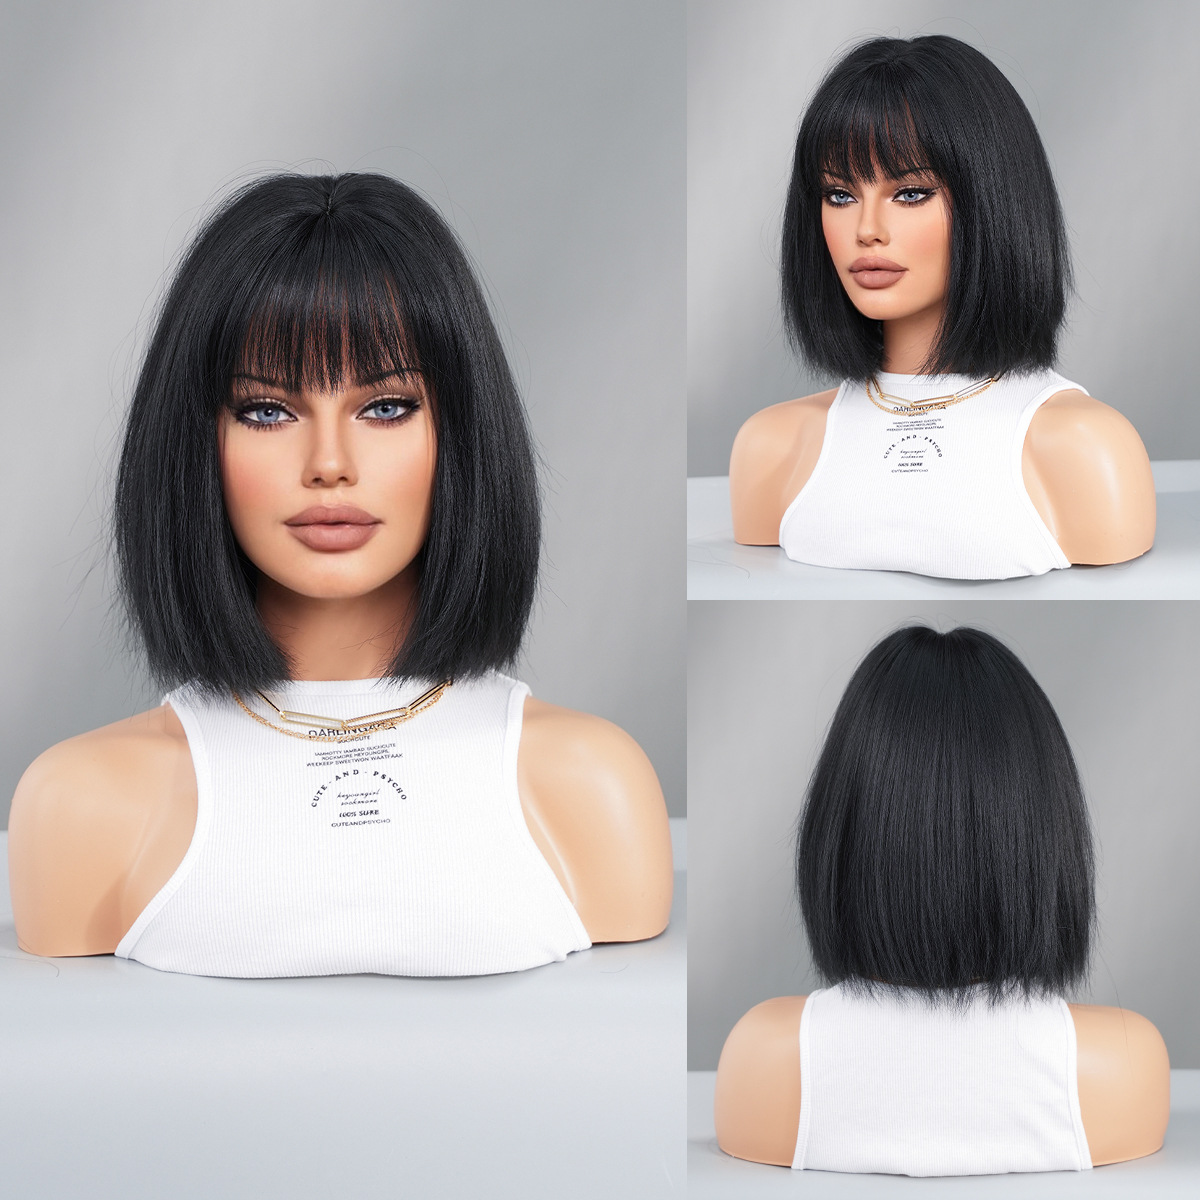 Ready-to-wear synthetic wig with a YAKI black bob cut, showcasing short straight hair and bangs